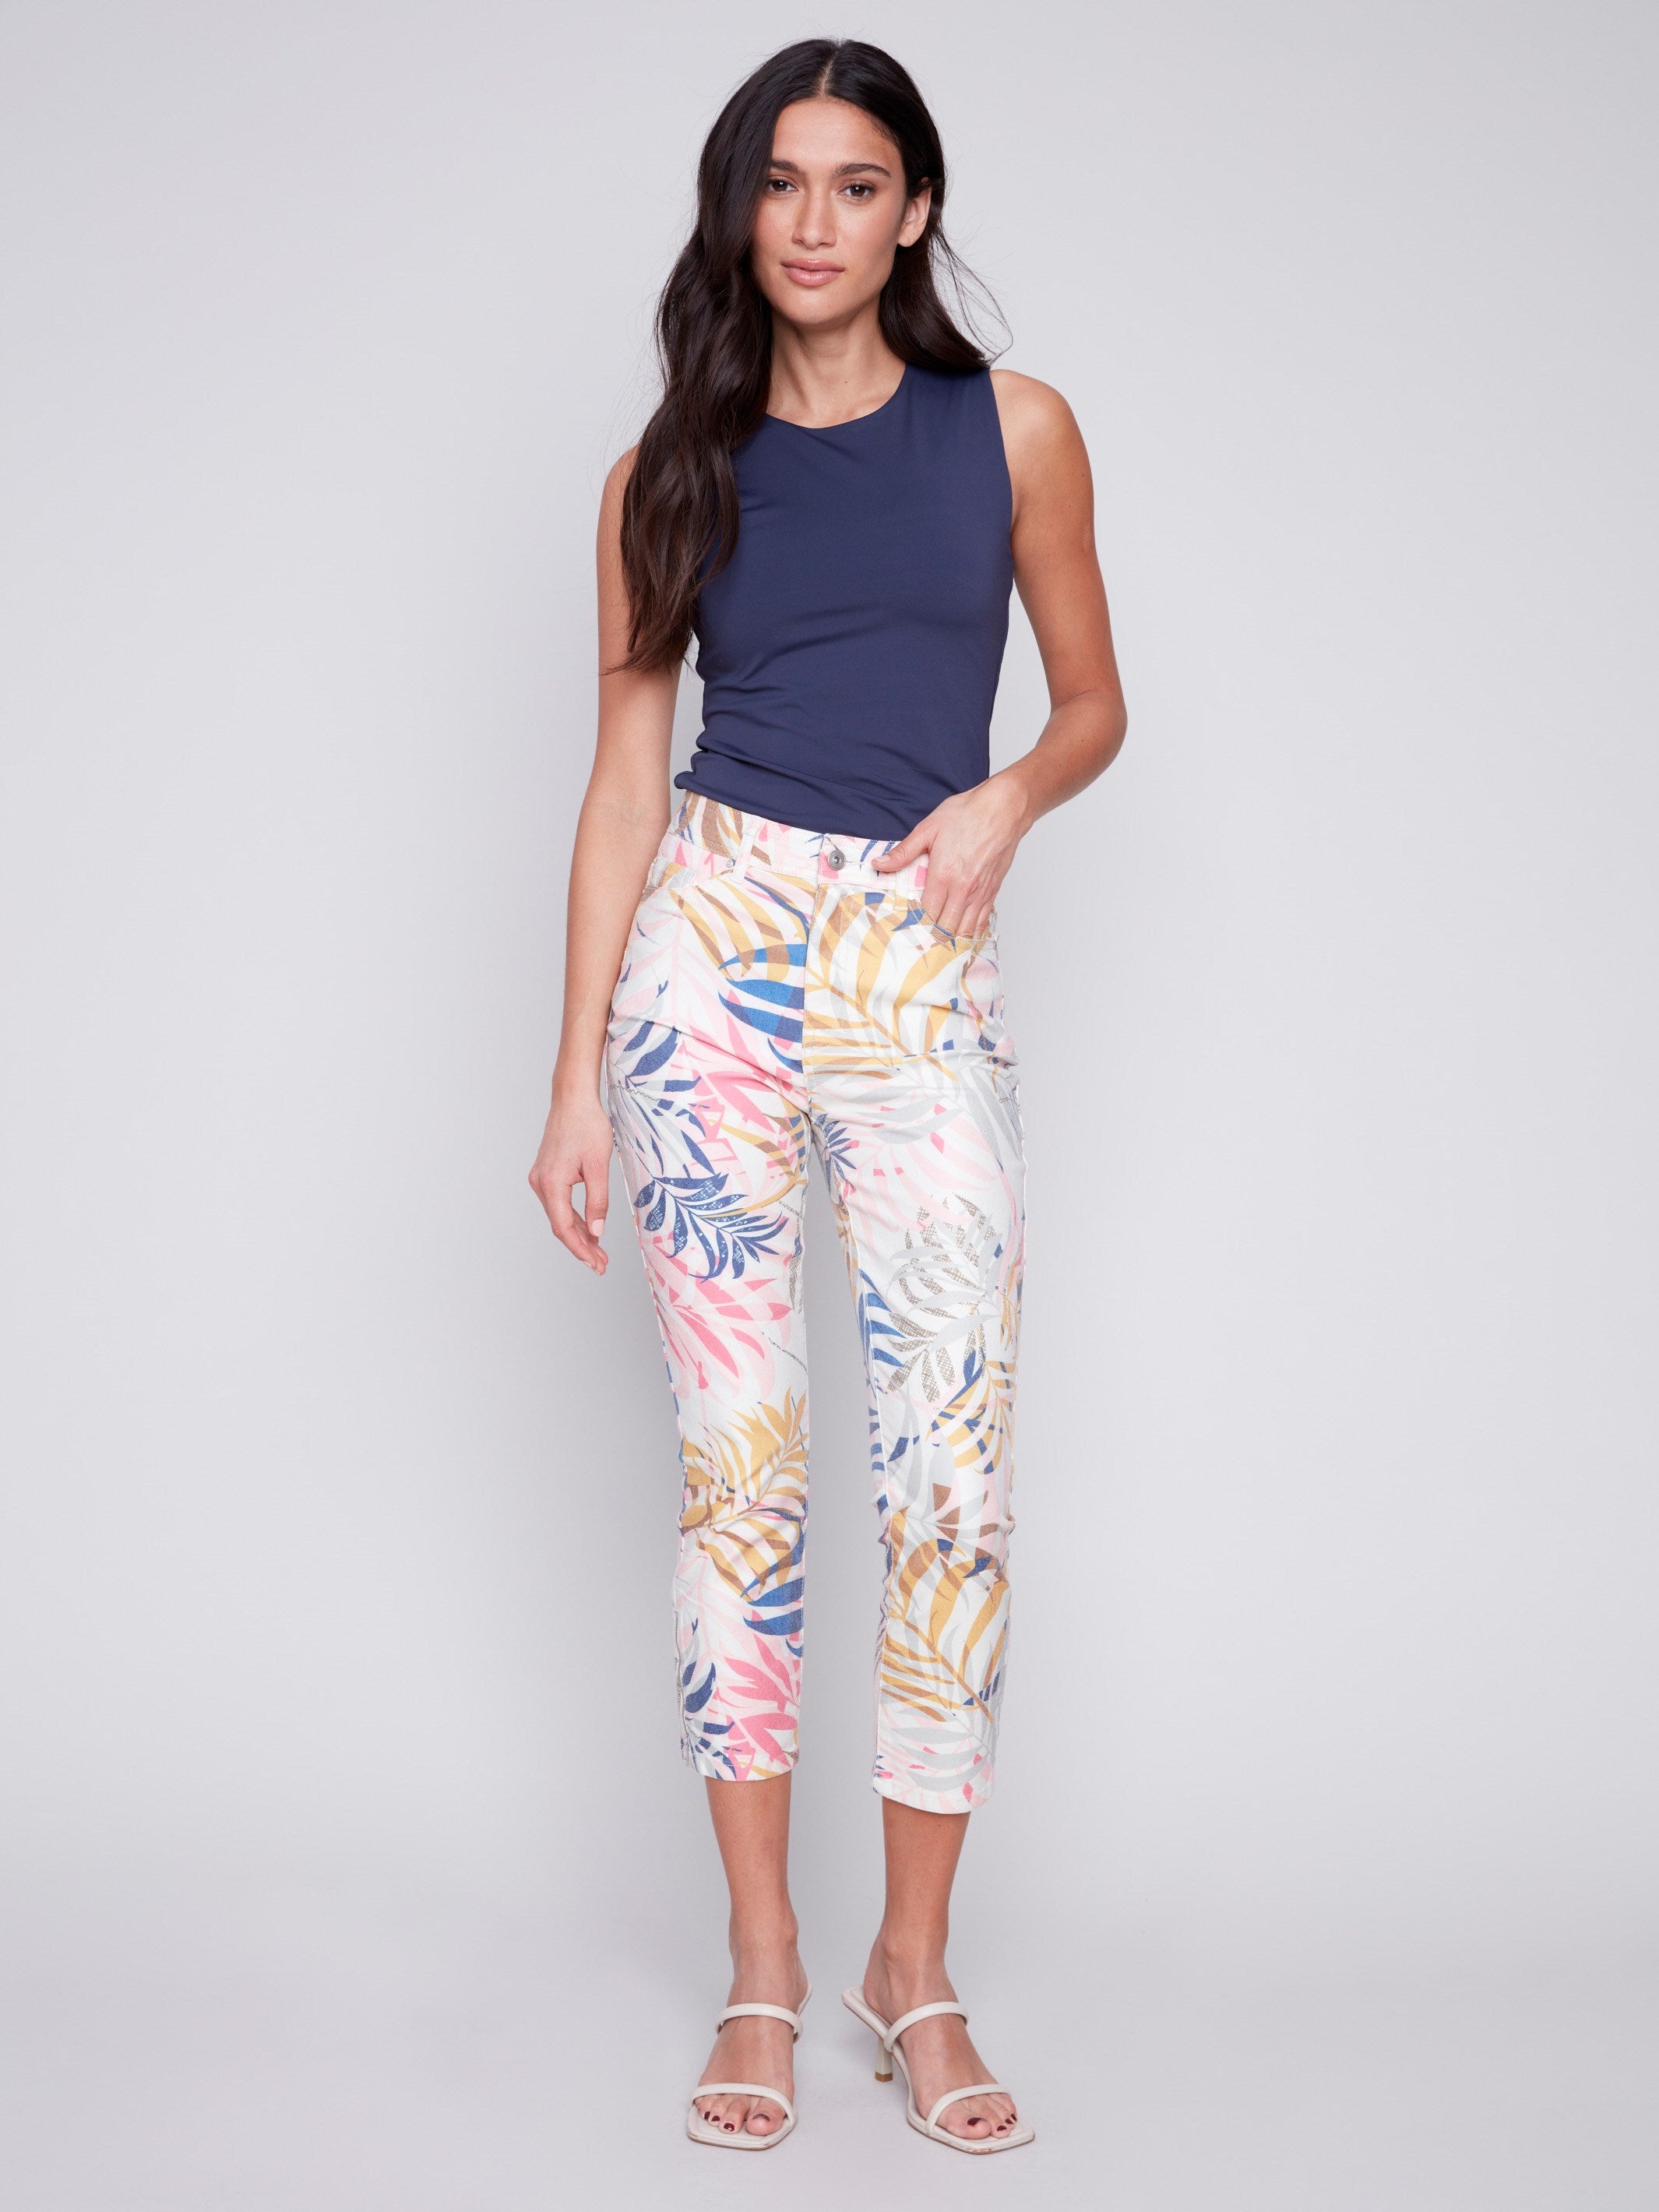 Charlie B Printed Cropped Twill Pants with Zipper Detail - Leaf - Image 1